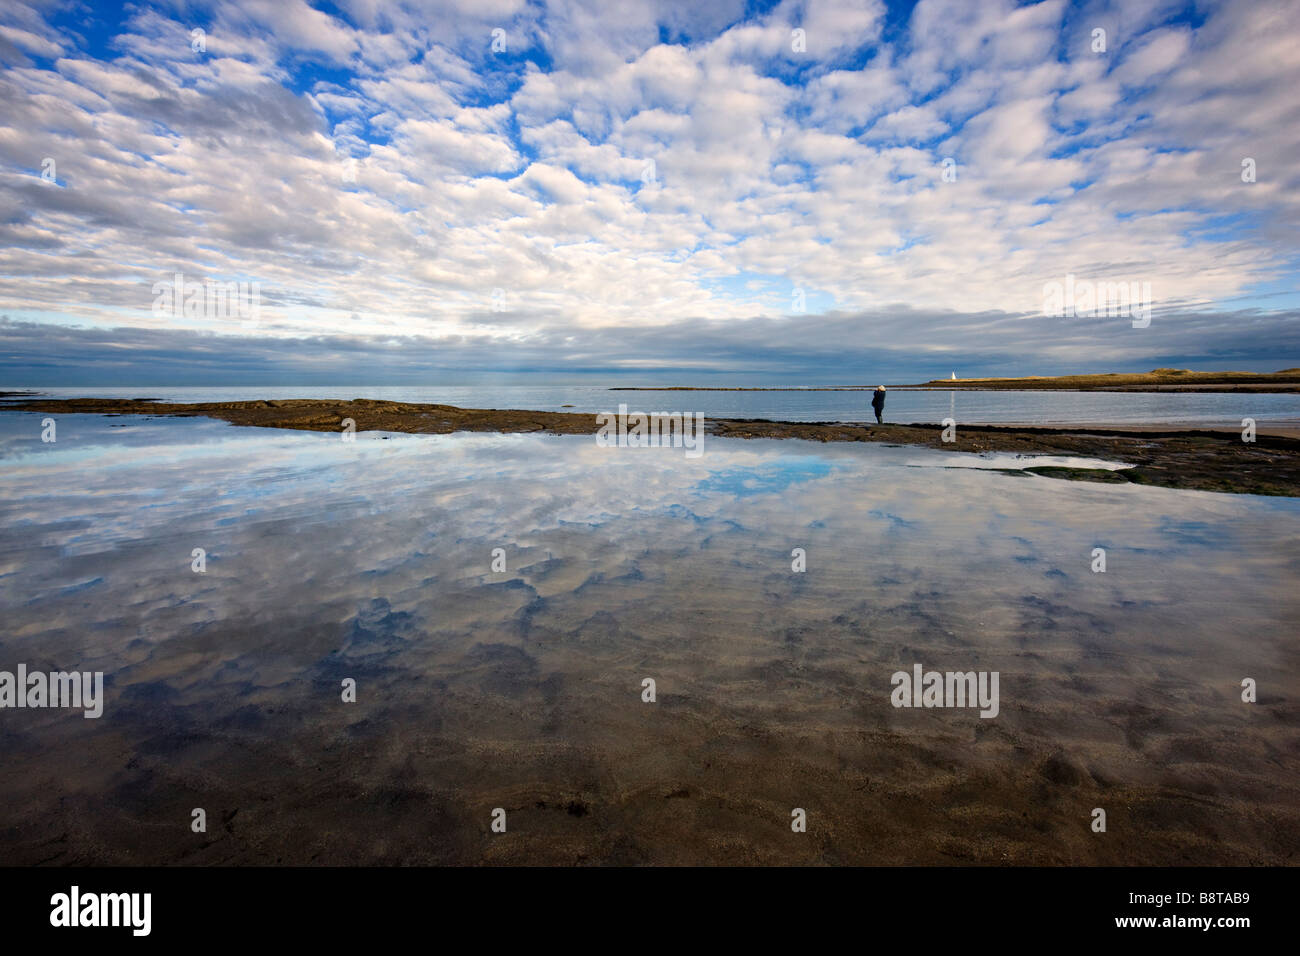 A birdwatcher dwarfed by the sea and sky at Sandham Bay, Holy Island, Northumbria UK Stock Photo